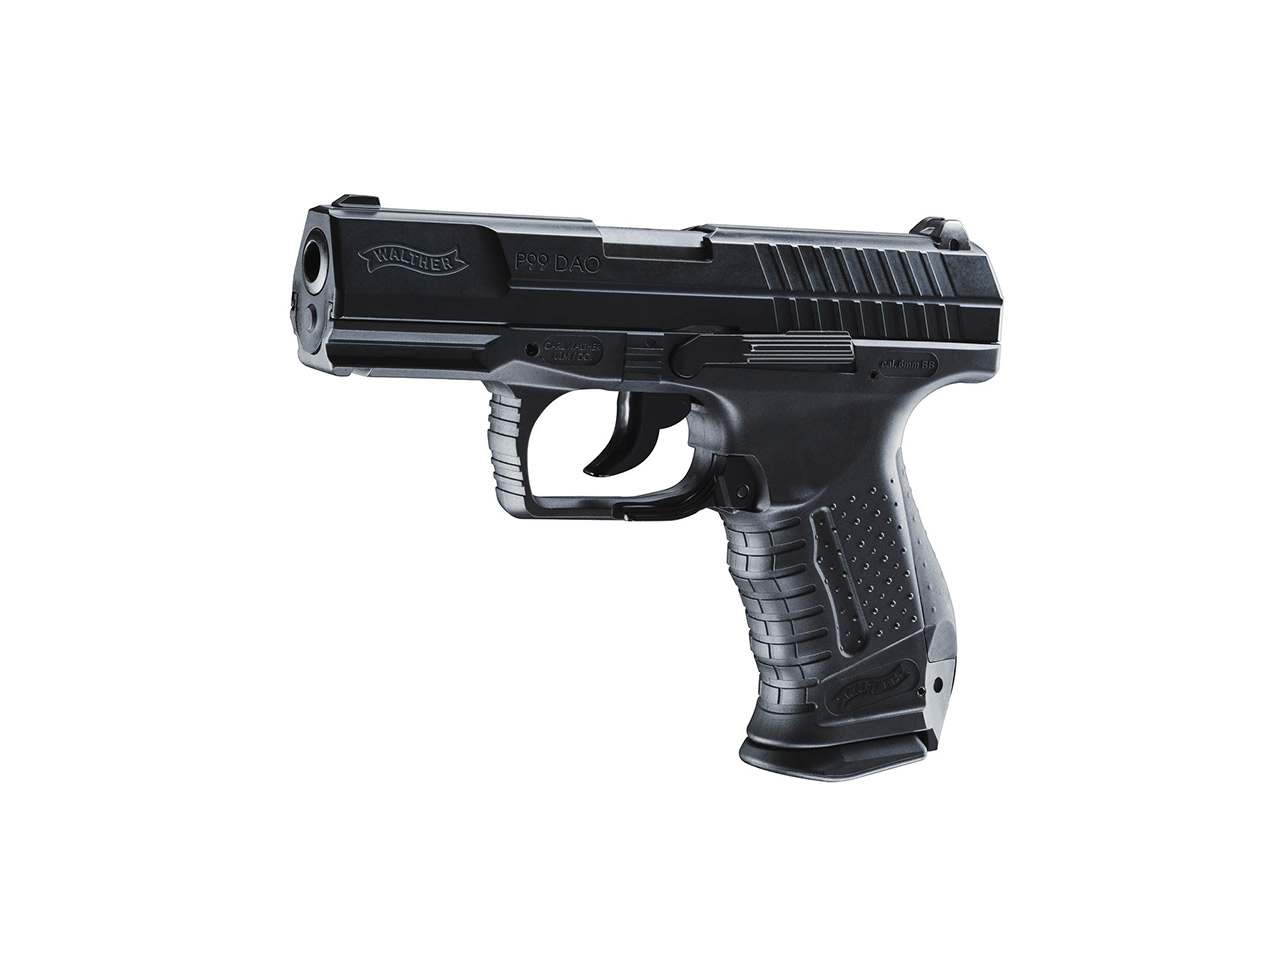 Softair CO2 Pistole Walther P99 DAO Kaliber 6 mm BB (P18)